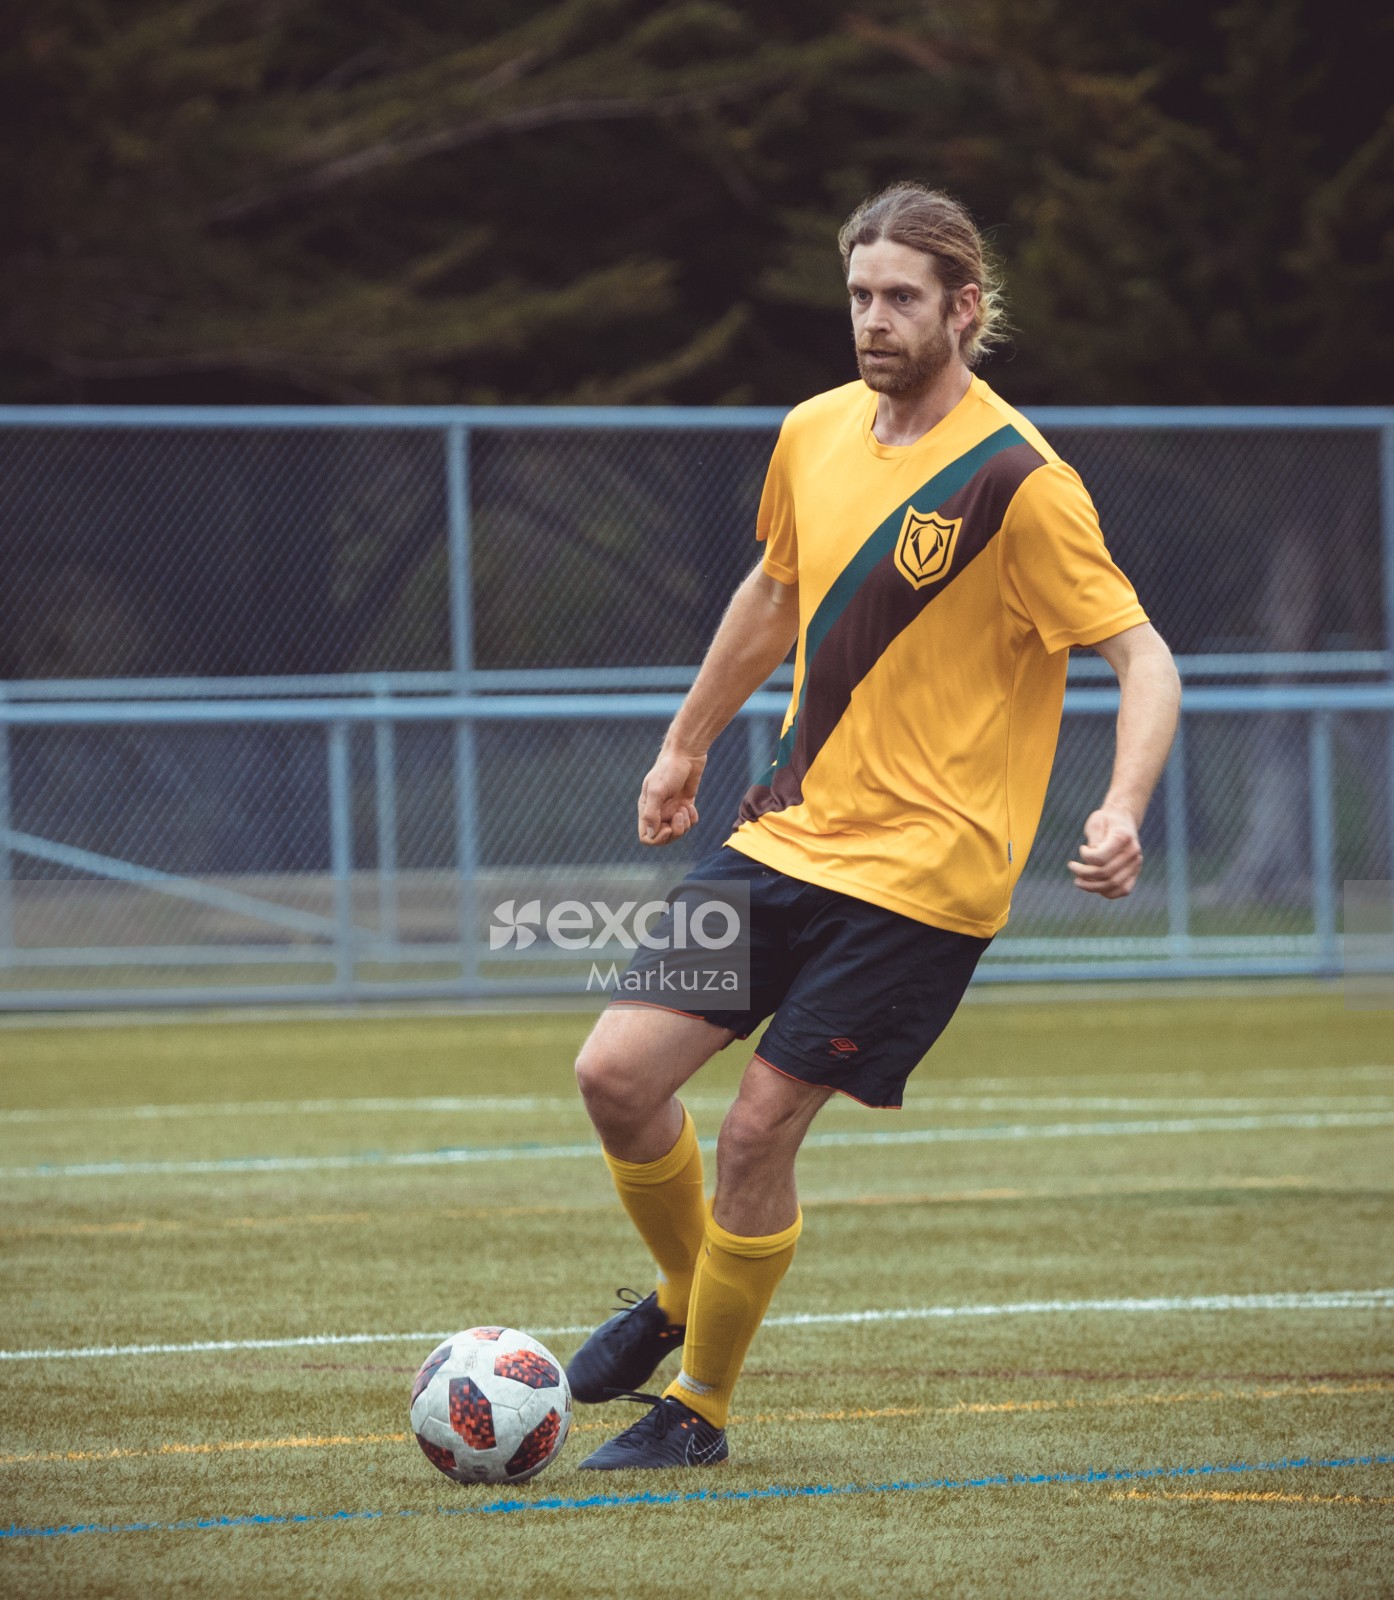 Player in yellow shirt taking a turn running with the football - Sports Zone sunday league